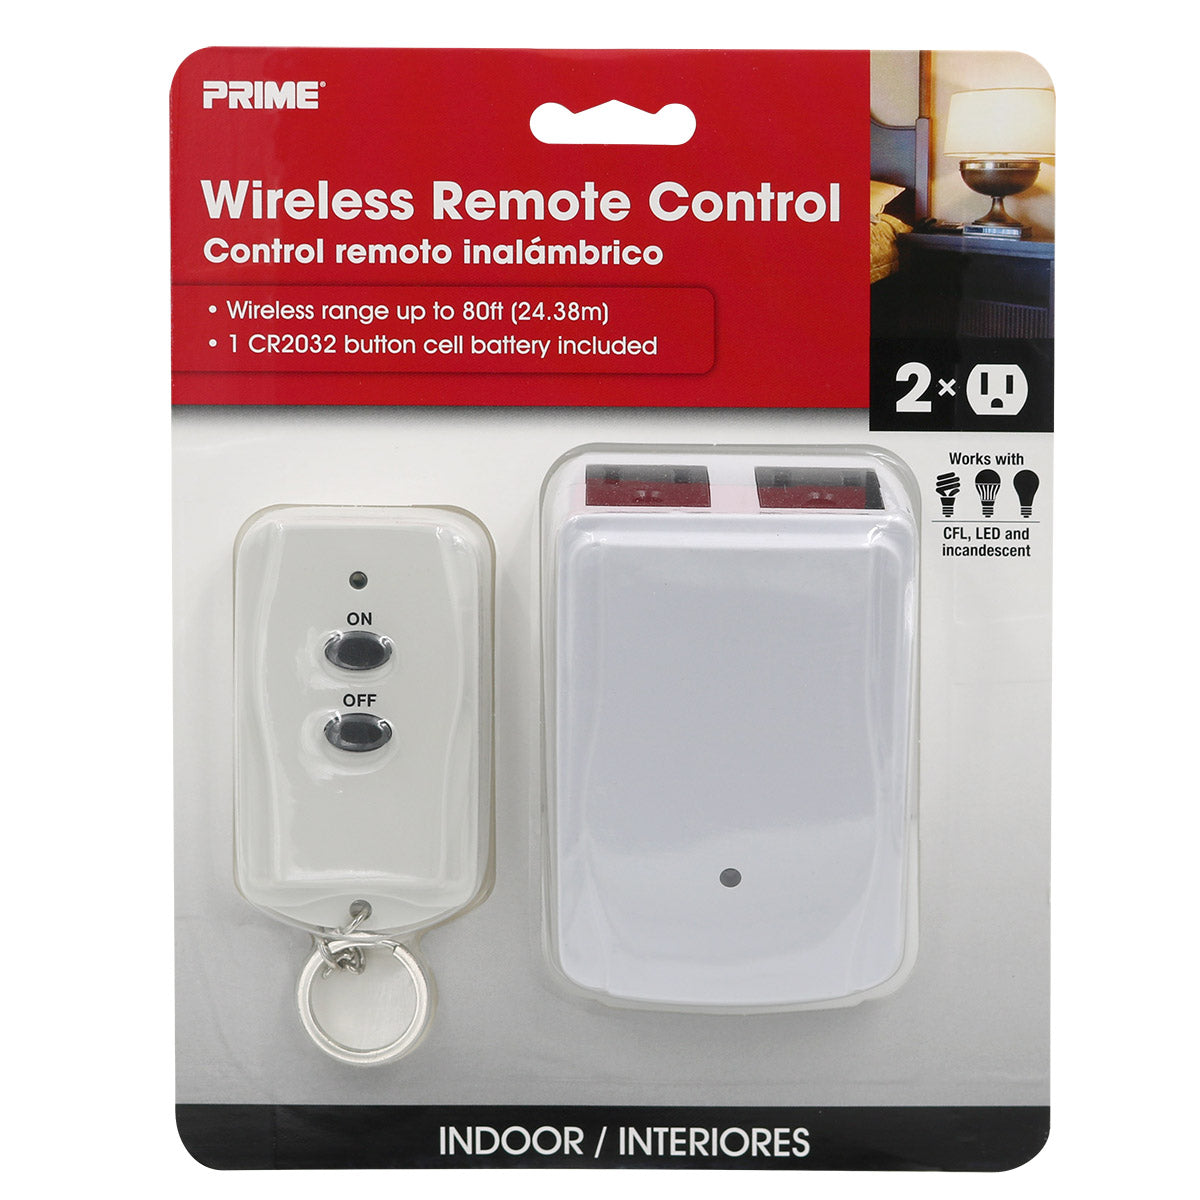 Eco Plugs Indoor Outlet Wireless Remote Control System, 2-Pack